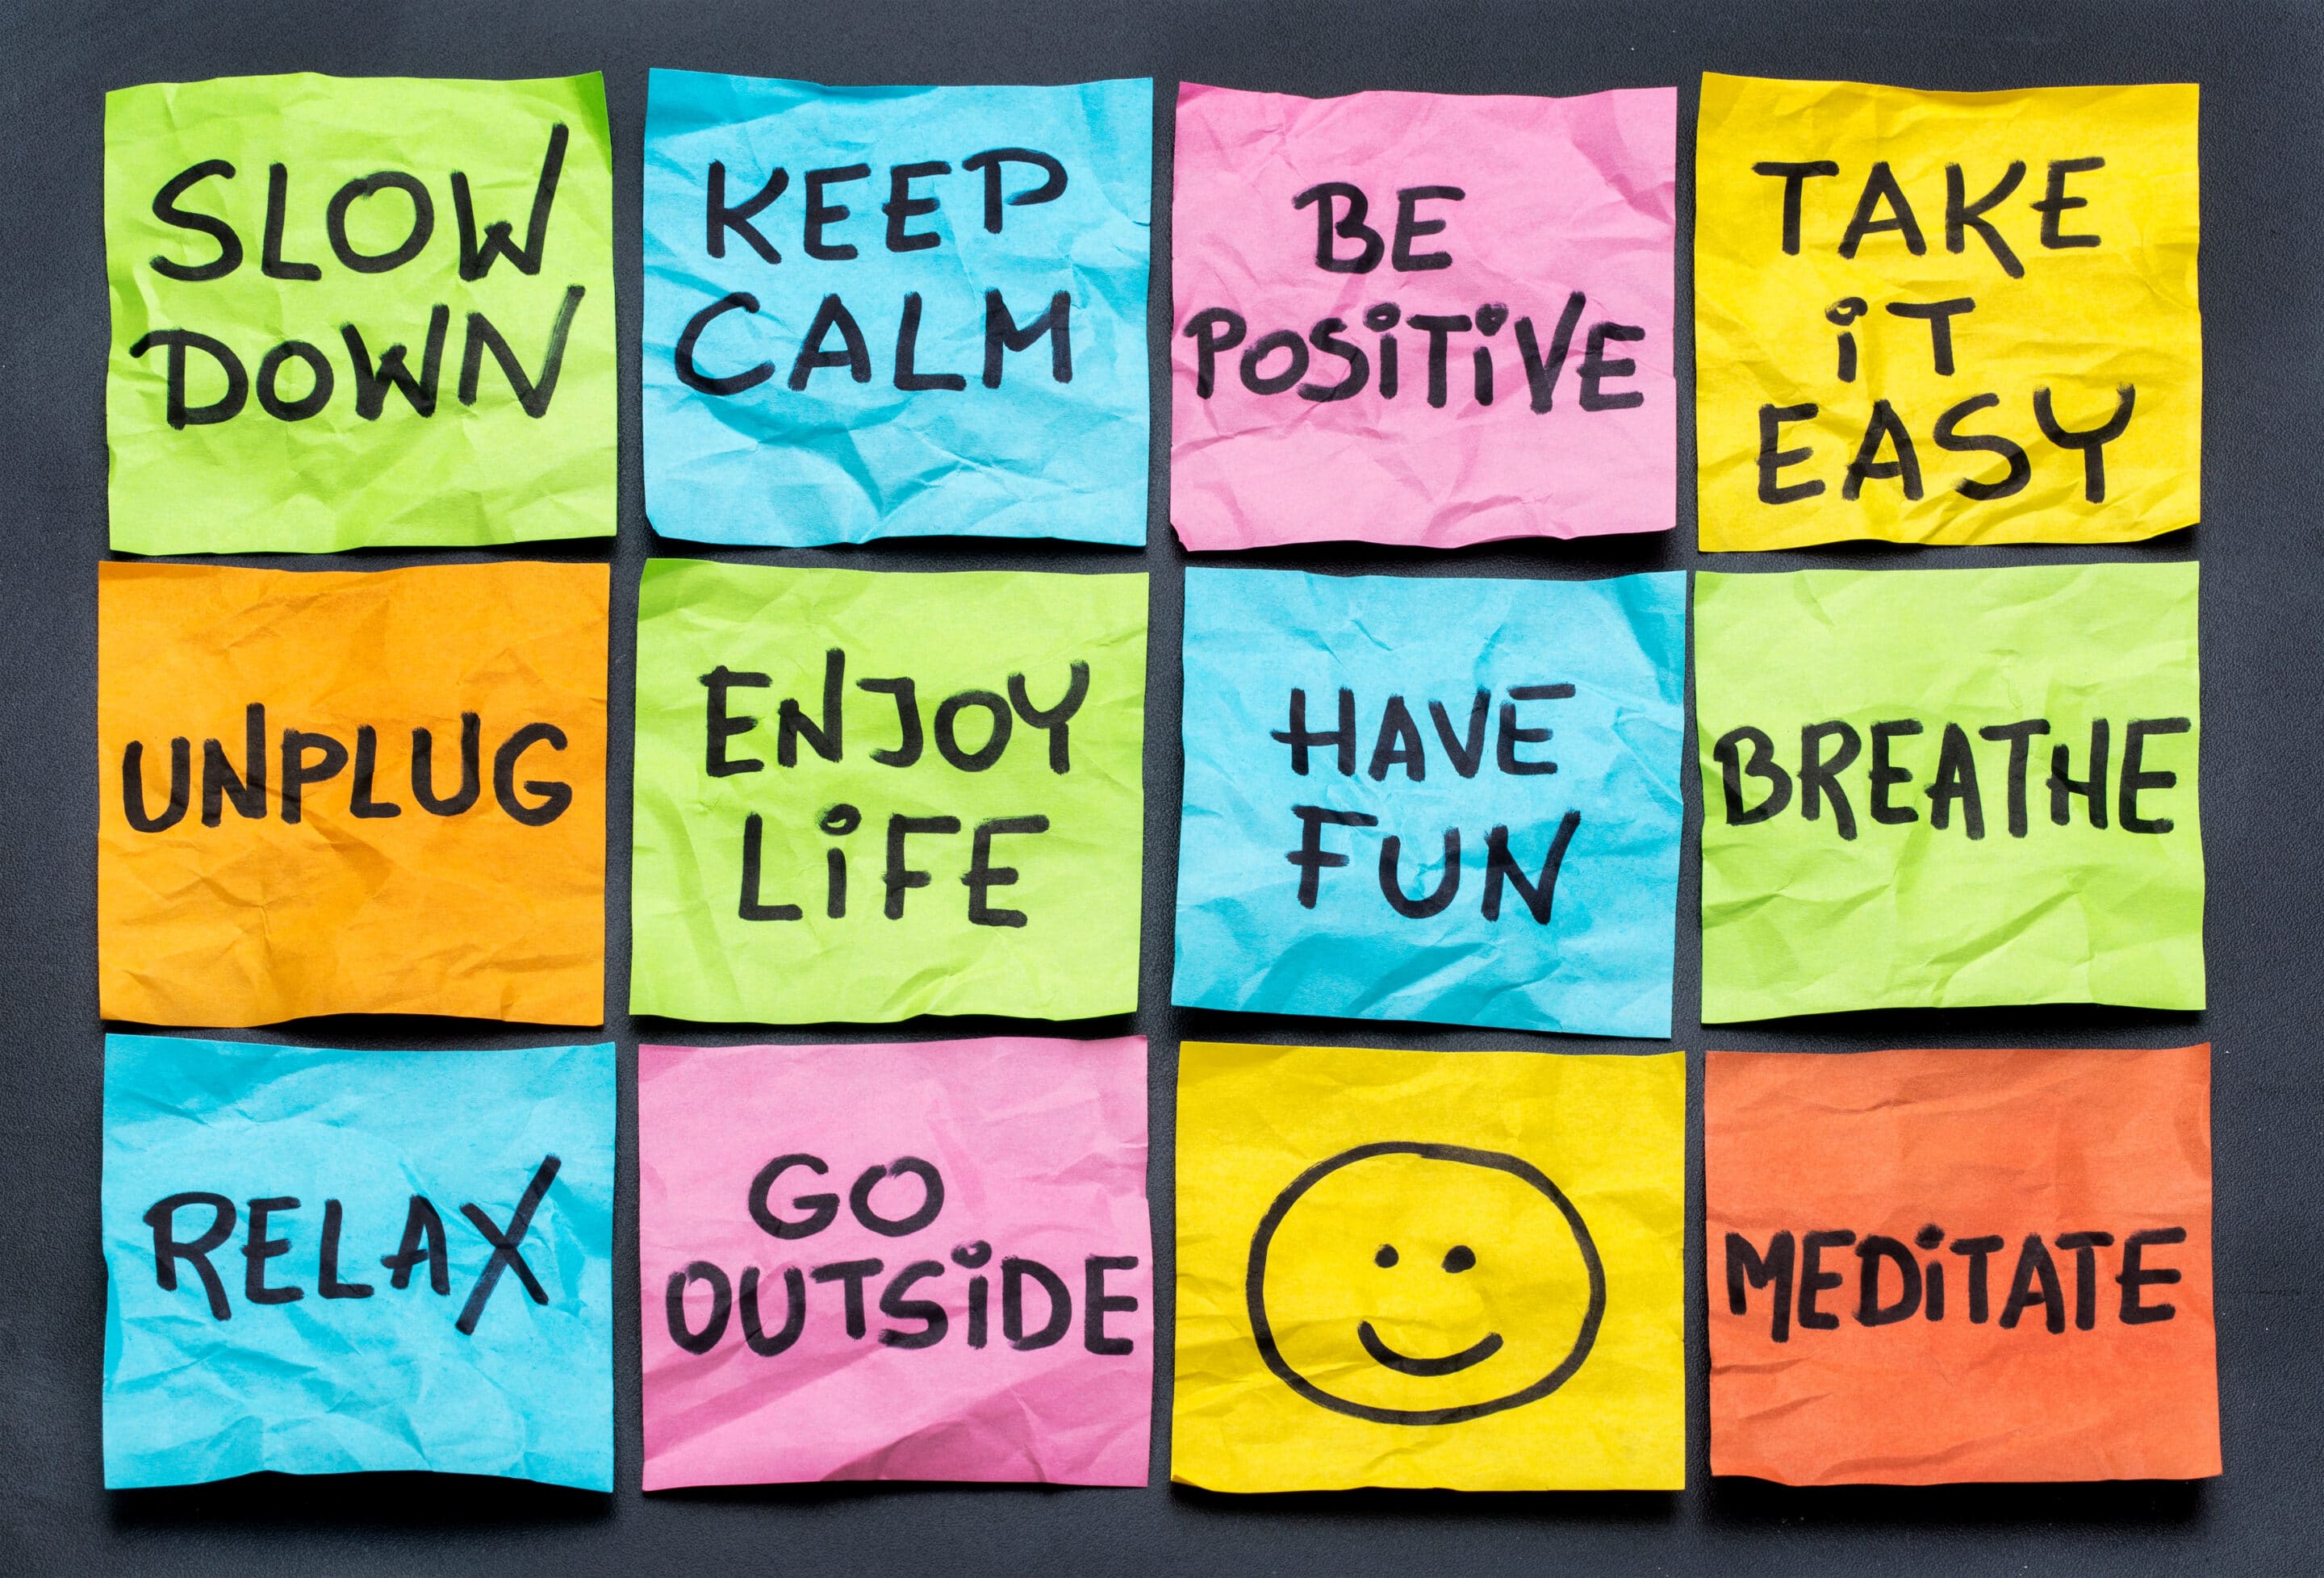 lifestyle reminders on colorful sticky notes including slow down, relax, take it easy, keep calm and other motivational reminders